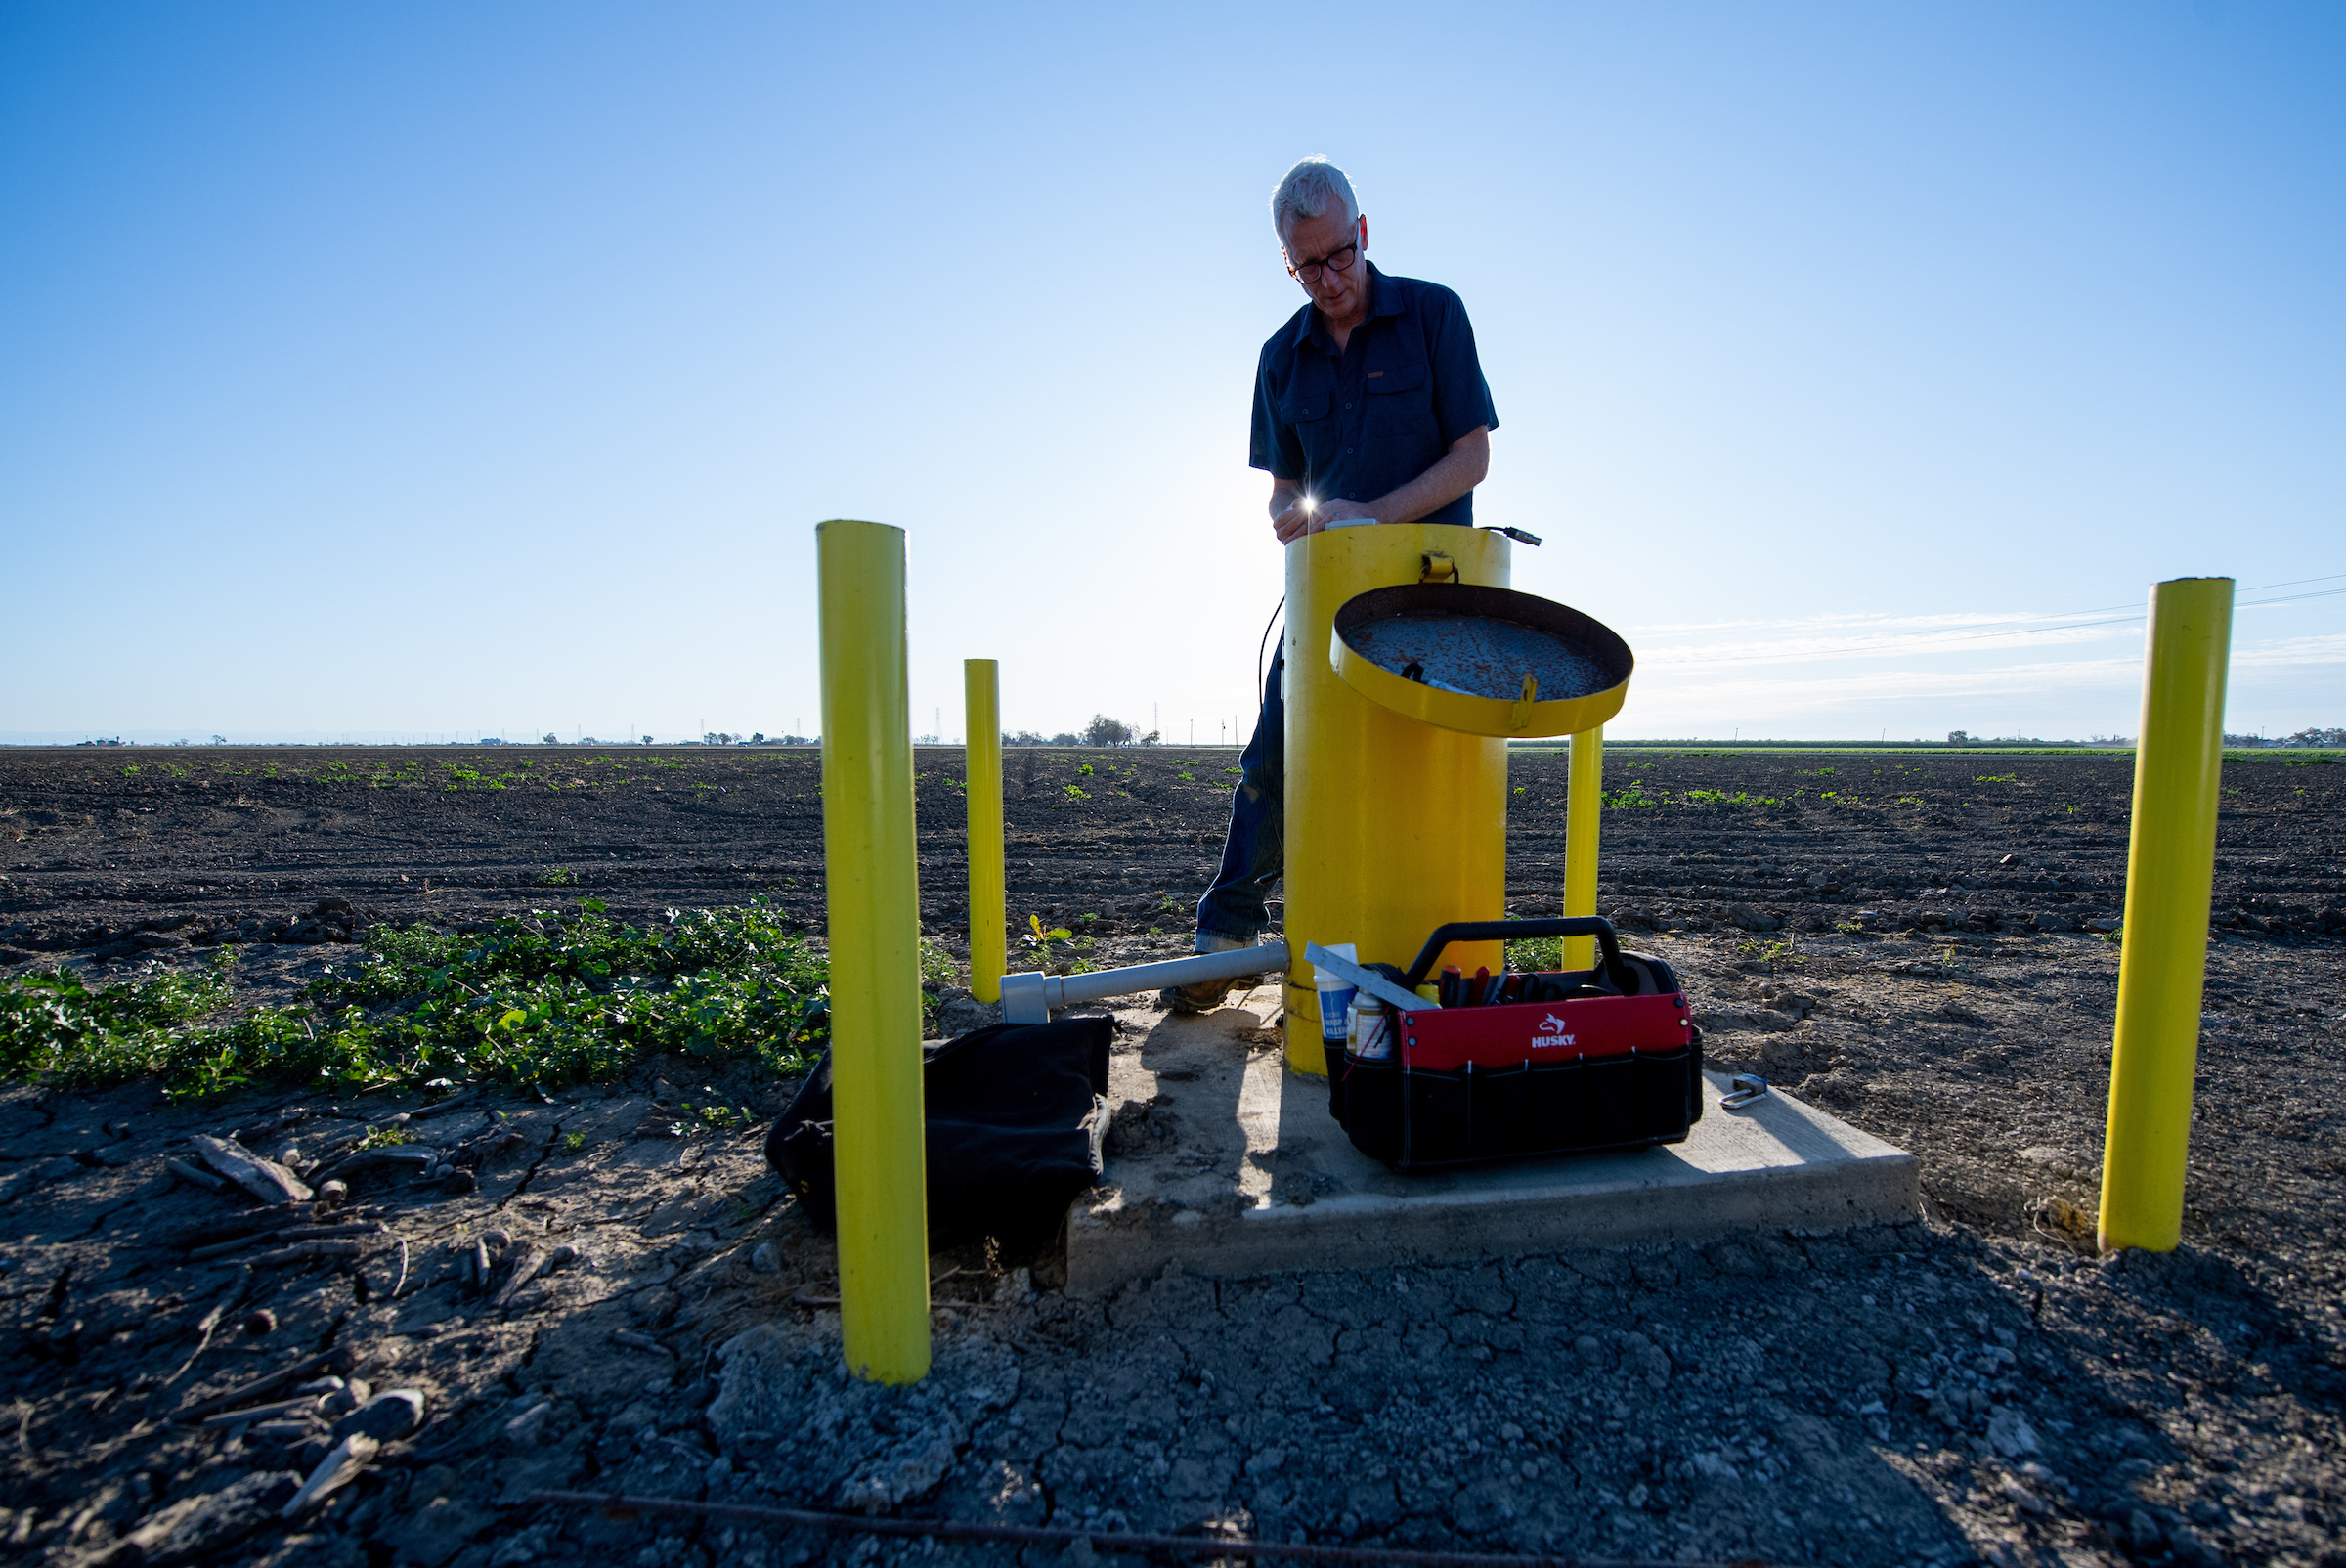 Aaron Cuthbertson, engineering geologist with the California Department of Water Resources, measures groundwater levels at designated monitoring wells in Yolo County on March 10, 2020.